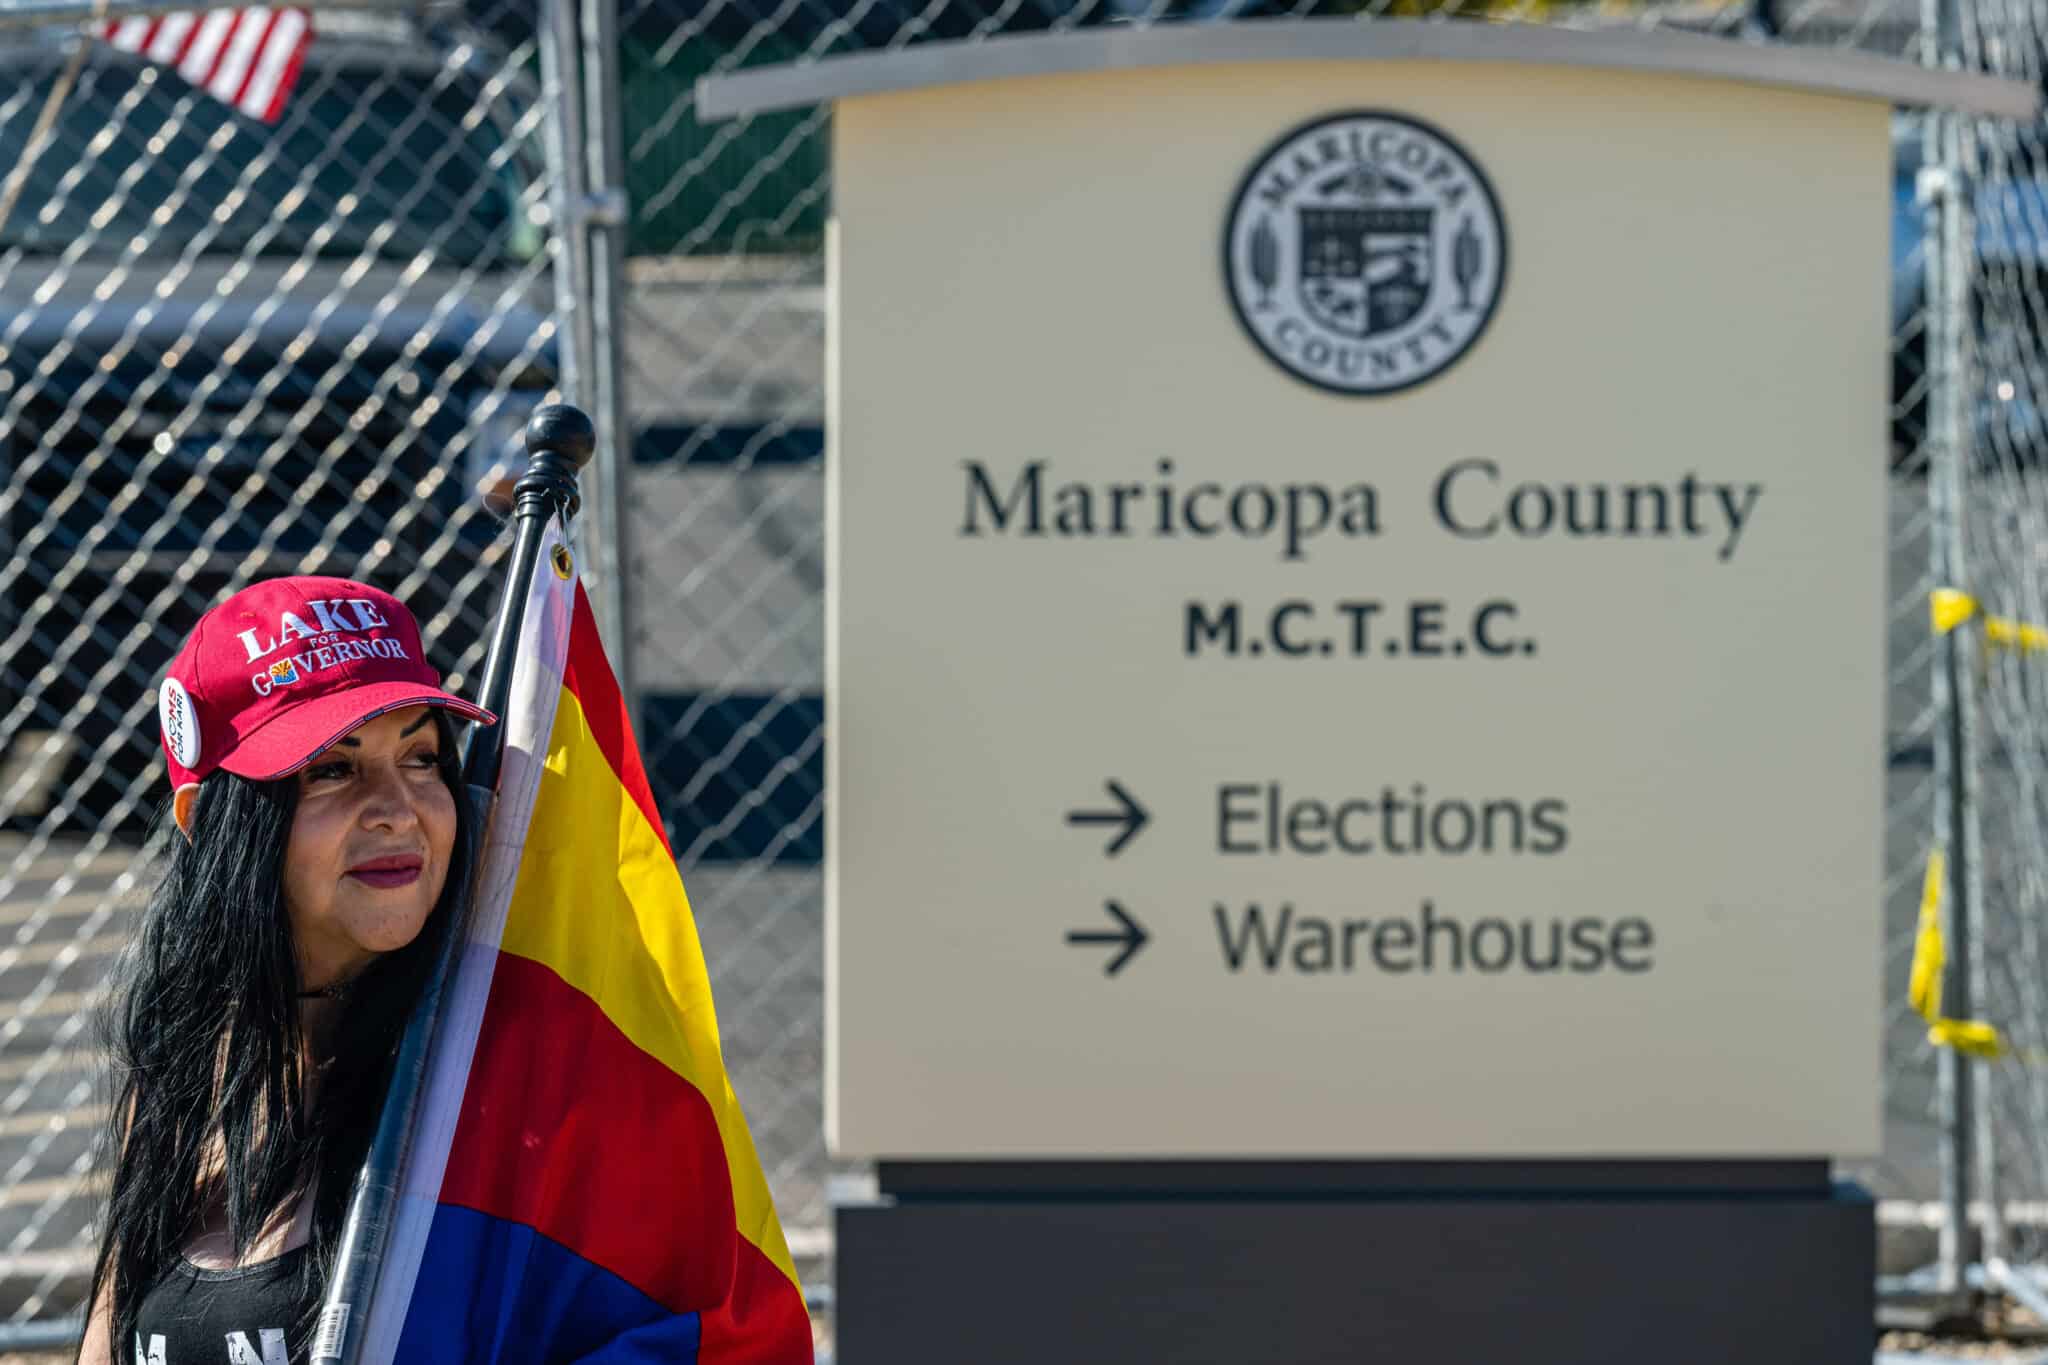 PHOENIX, AZ - NOVEMBER 14: A right wing activist wearing a 'LAKE FOR GOVERNOR' hat stands on the sidewalk in protest of the election process in front of the Maricopa County Tabulation and Election Center on November 14, 2022 in Phoenix, Arizona. Ballots continue to be counted in Maricopa County following the November 8 midterm election as officials push back against conspiracy theories claiming the process is being delayed. (Photo by Jon Cherry/Getty Images)